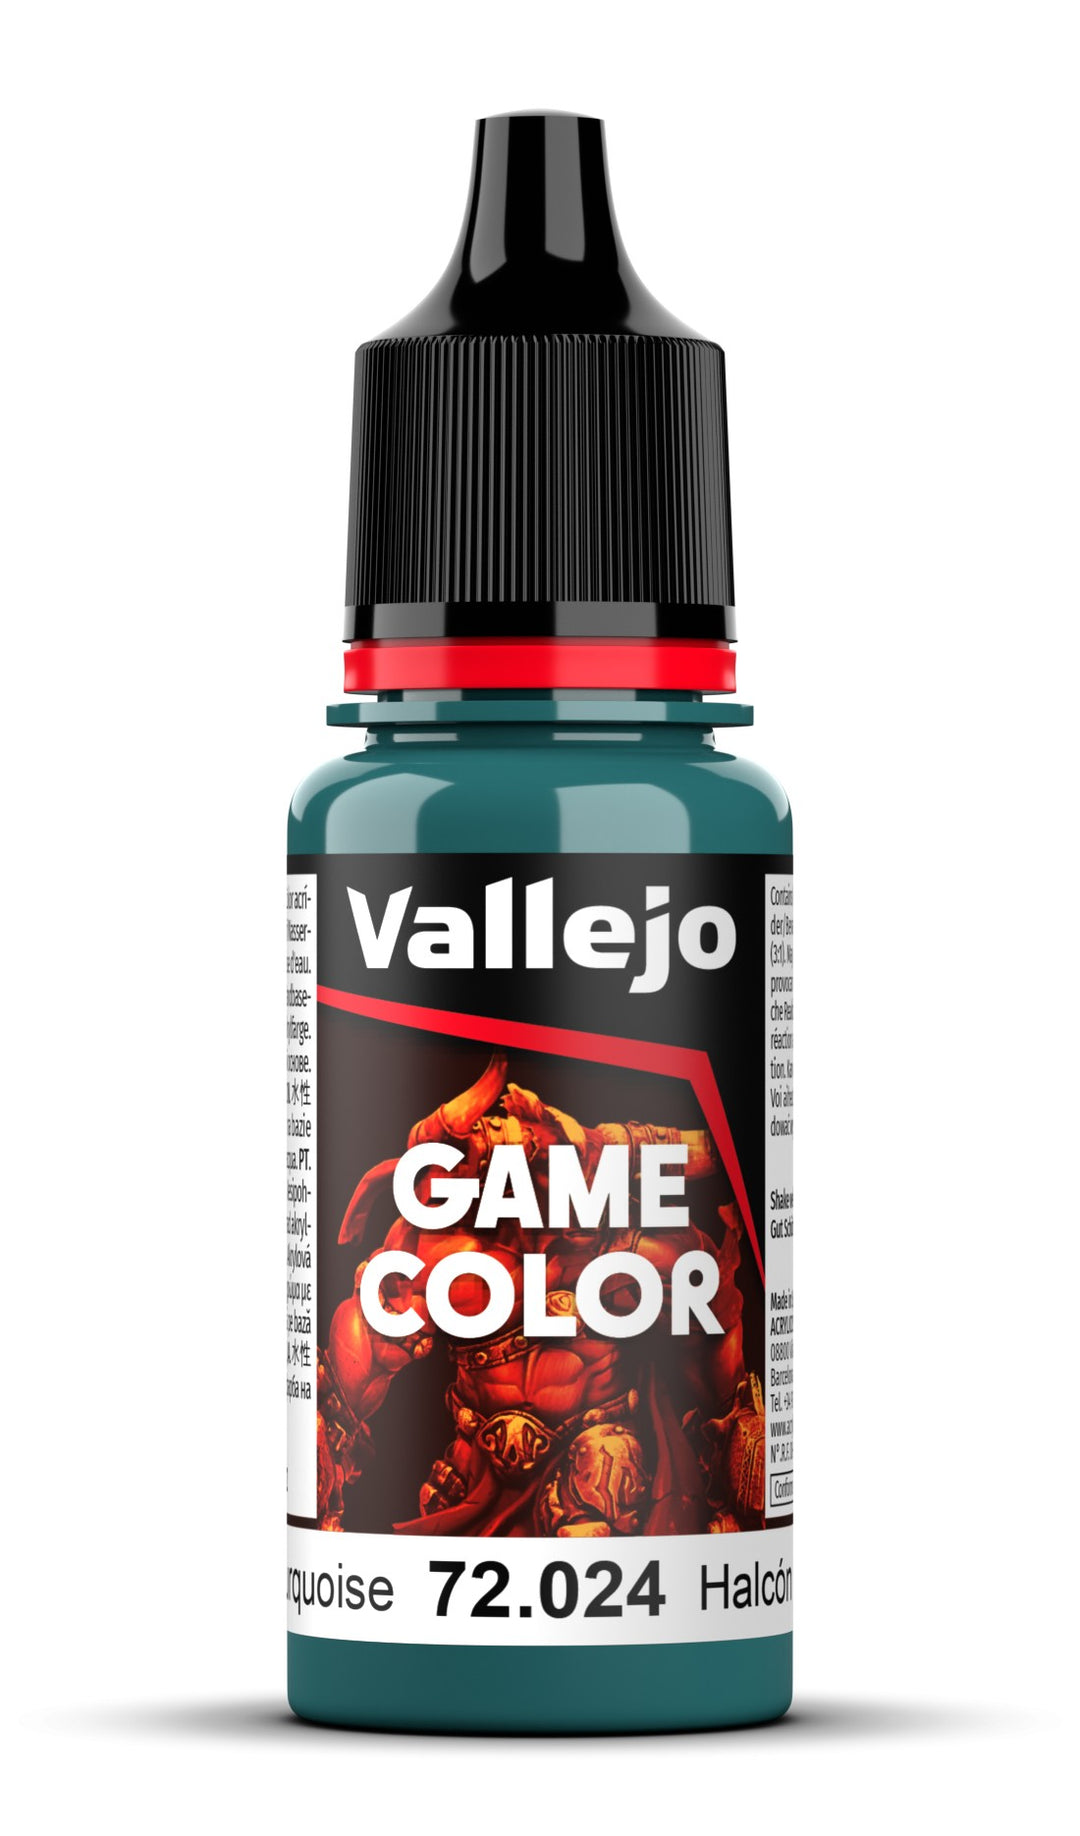 Vallejo Game Color - Turquoise 18 ml